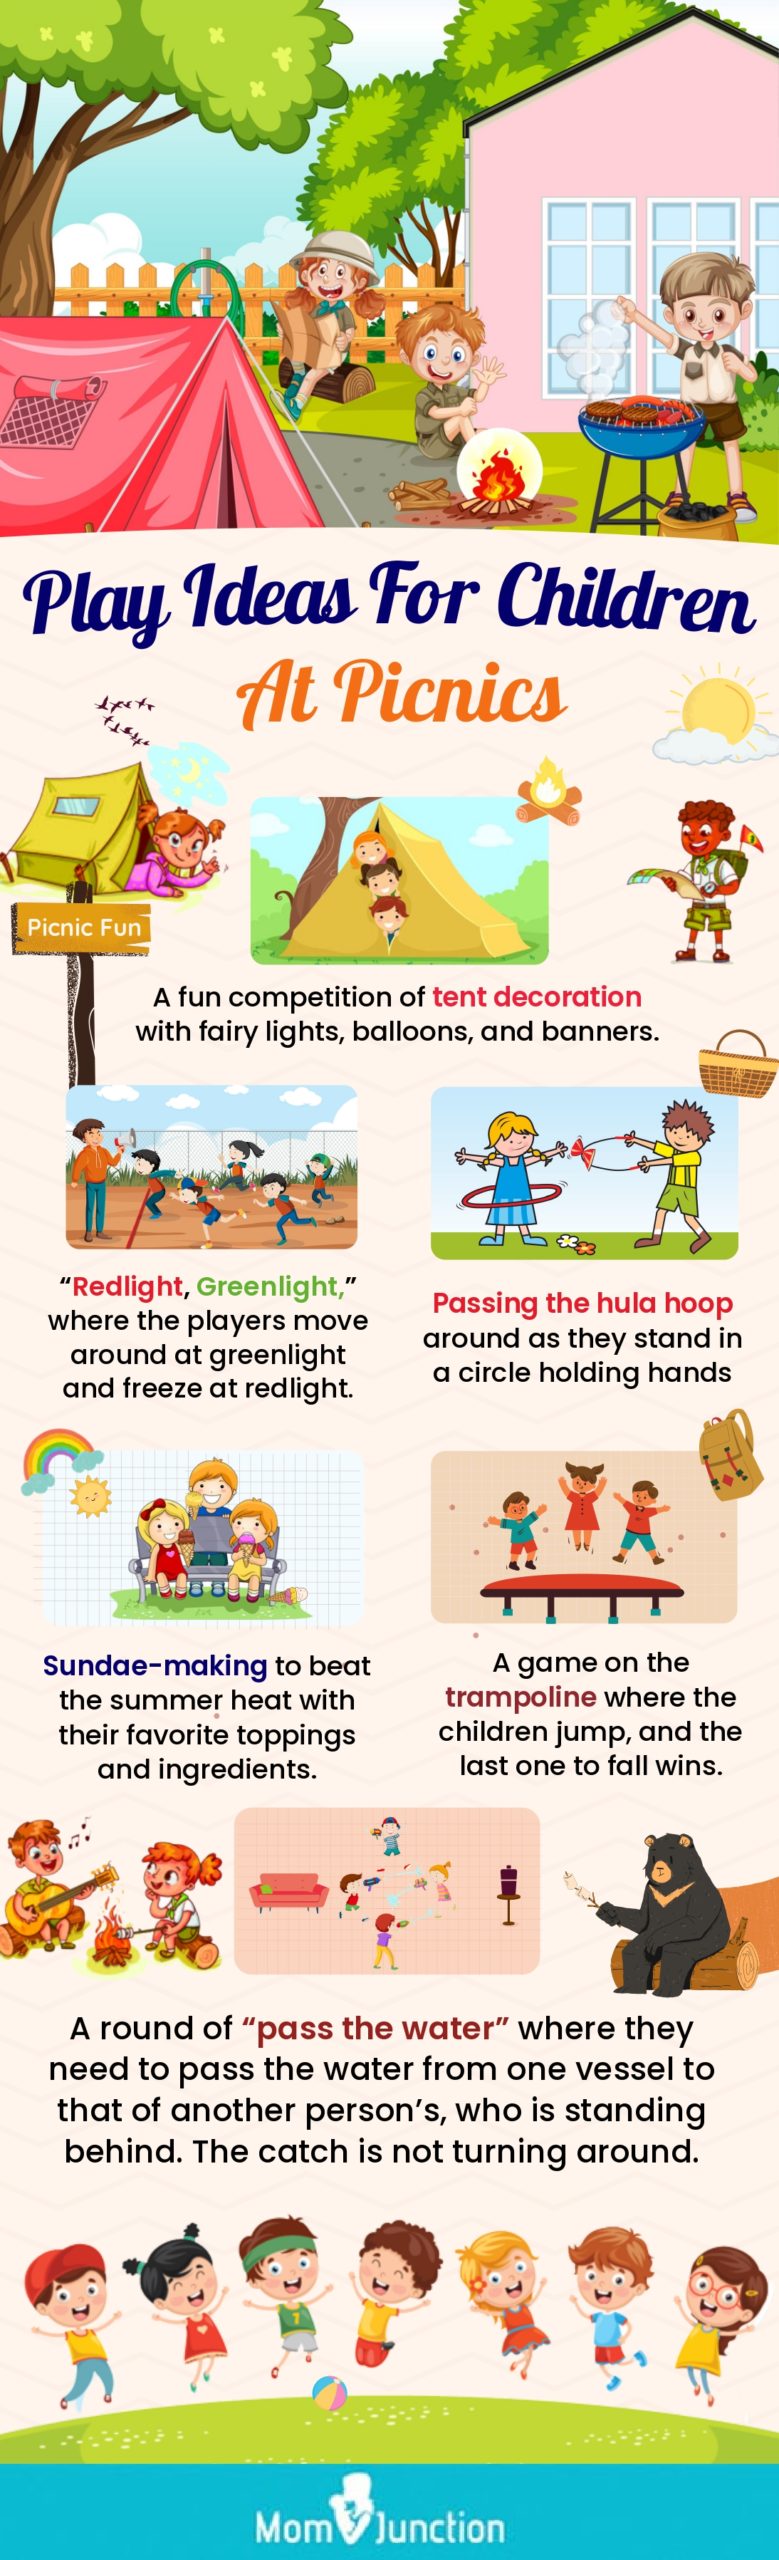 play ideas for children at picnics (infographic)